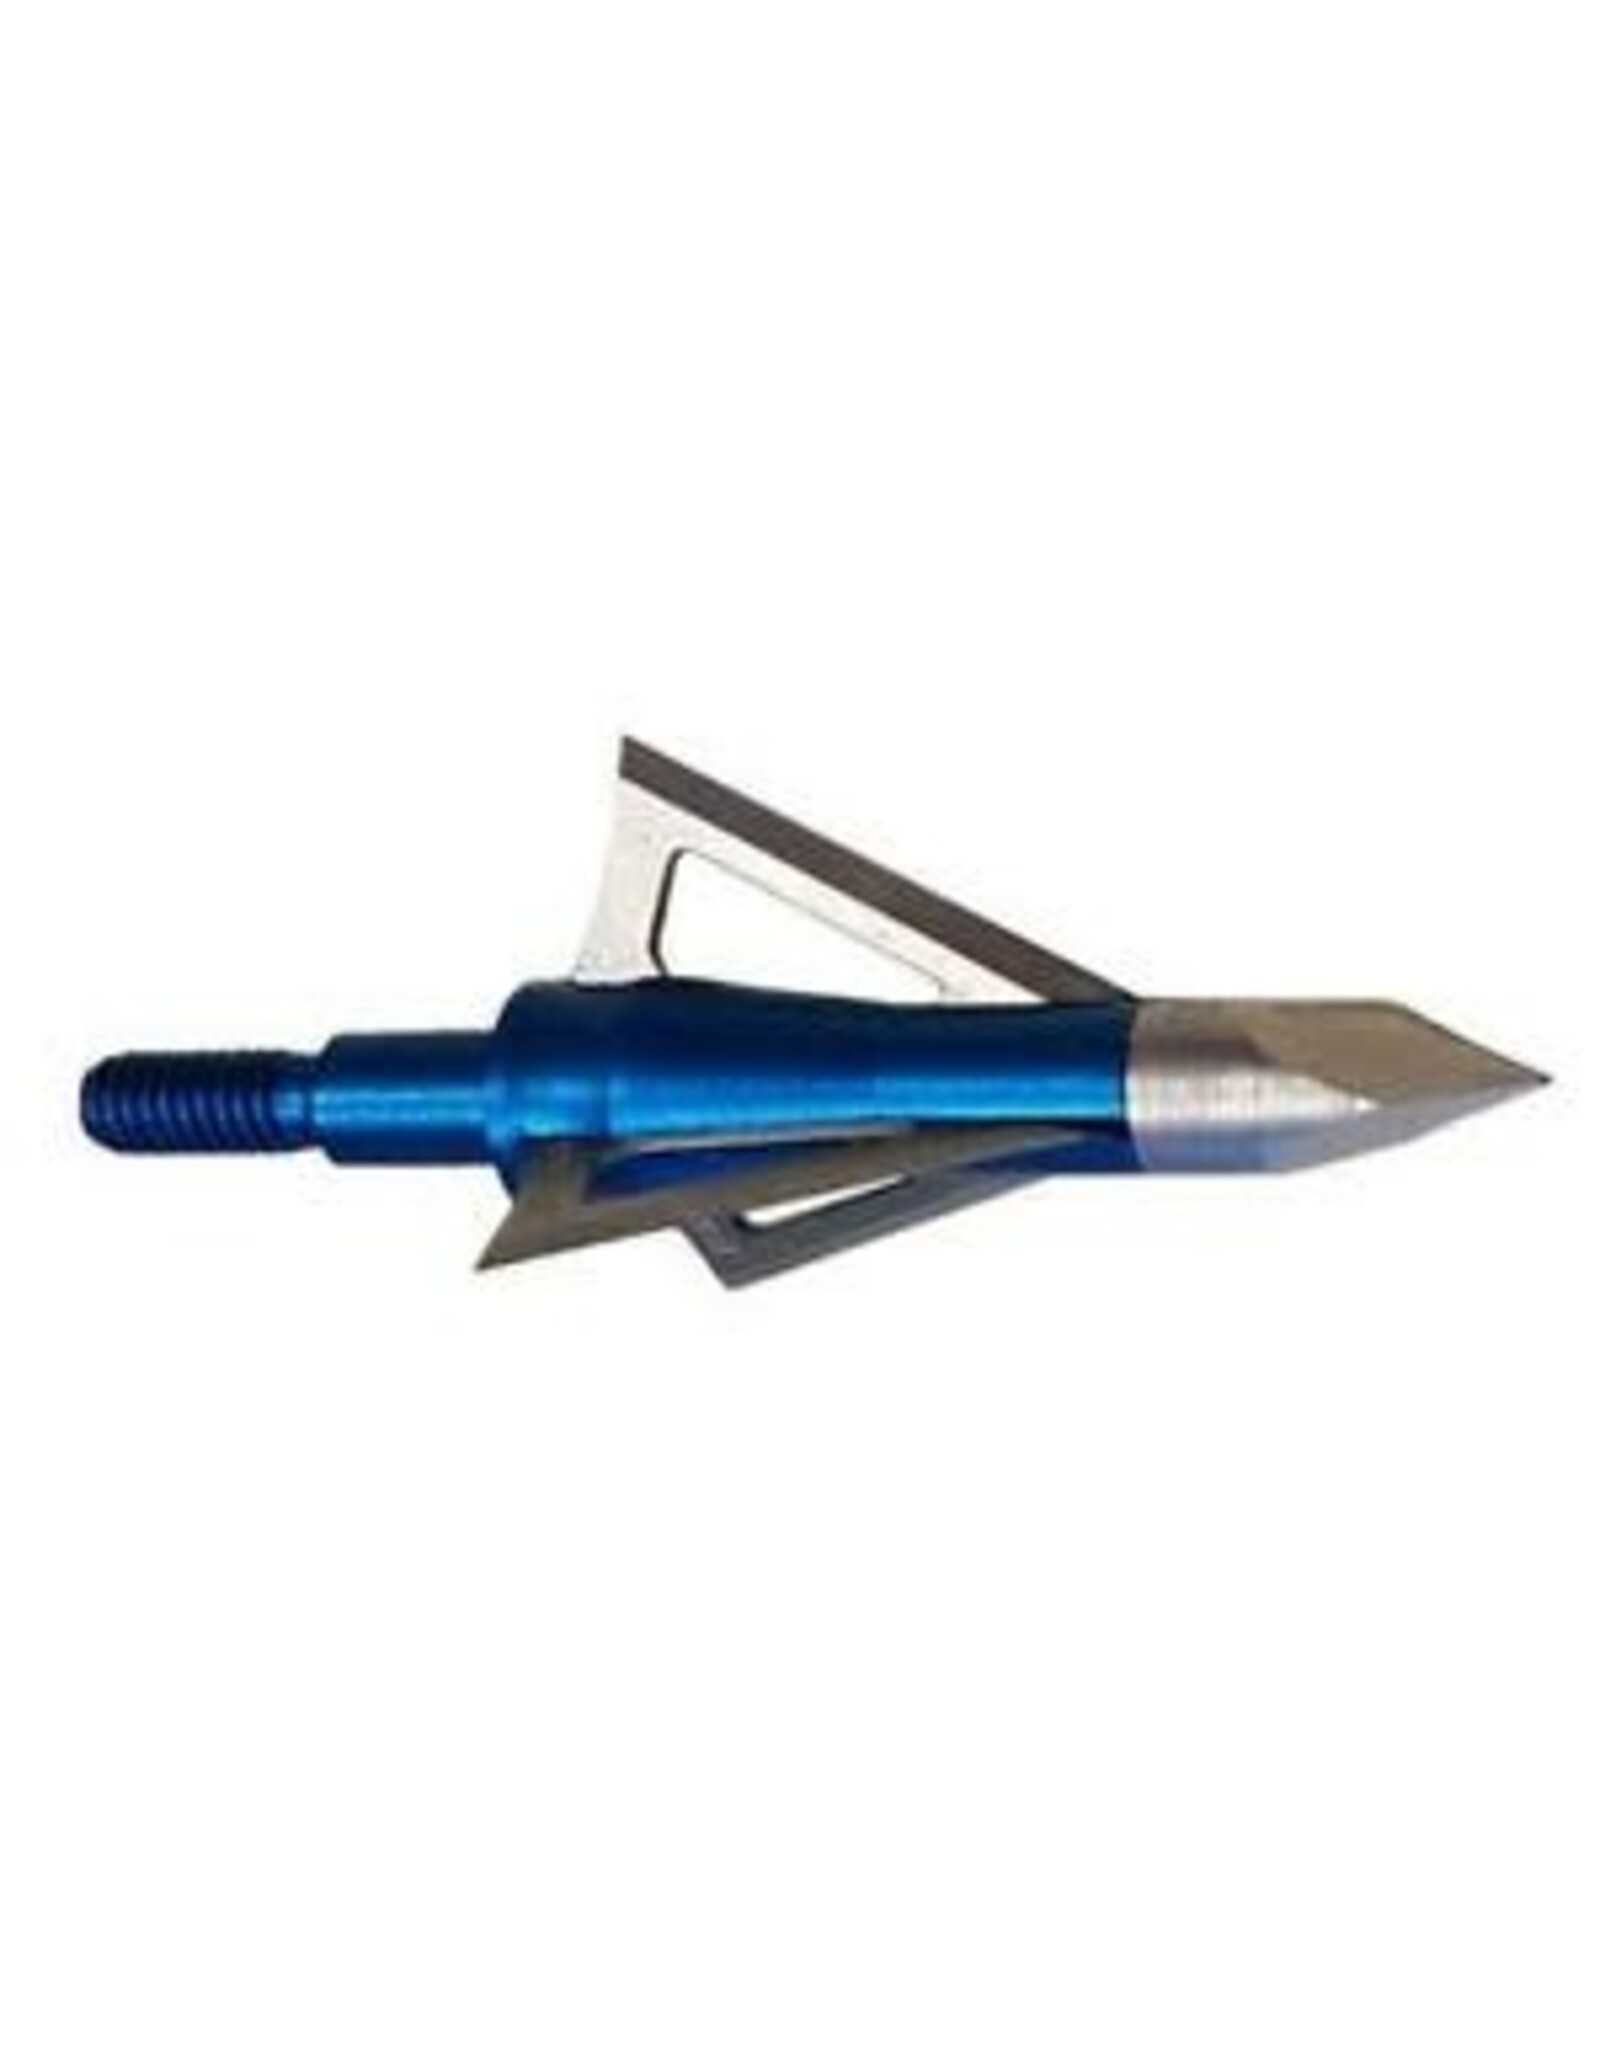 Excalibur Excalibur Crossbow Boltcutter Broadhead 100gr ~ 3 pack